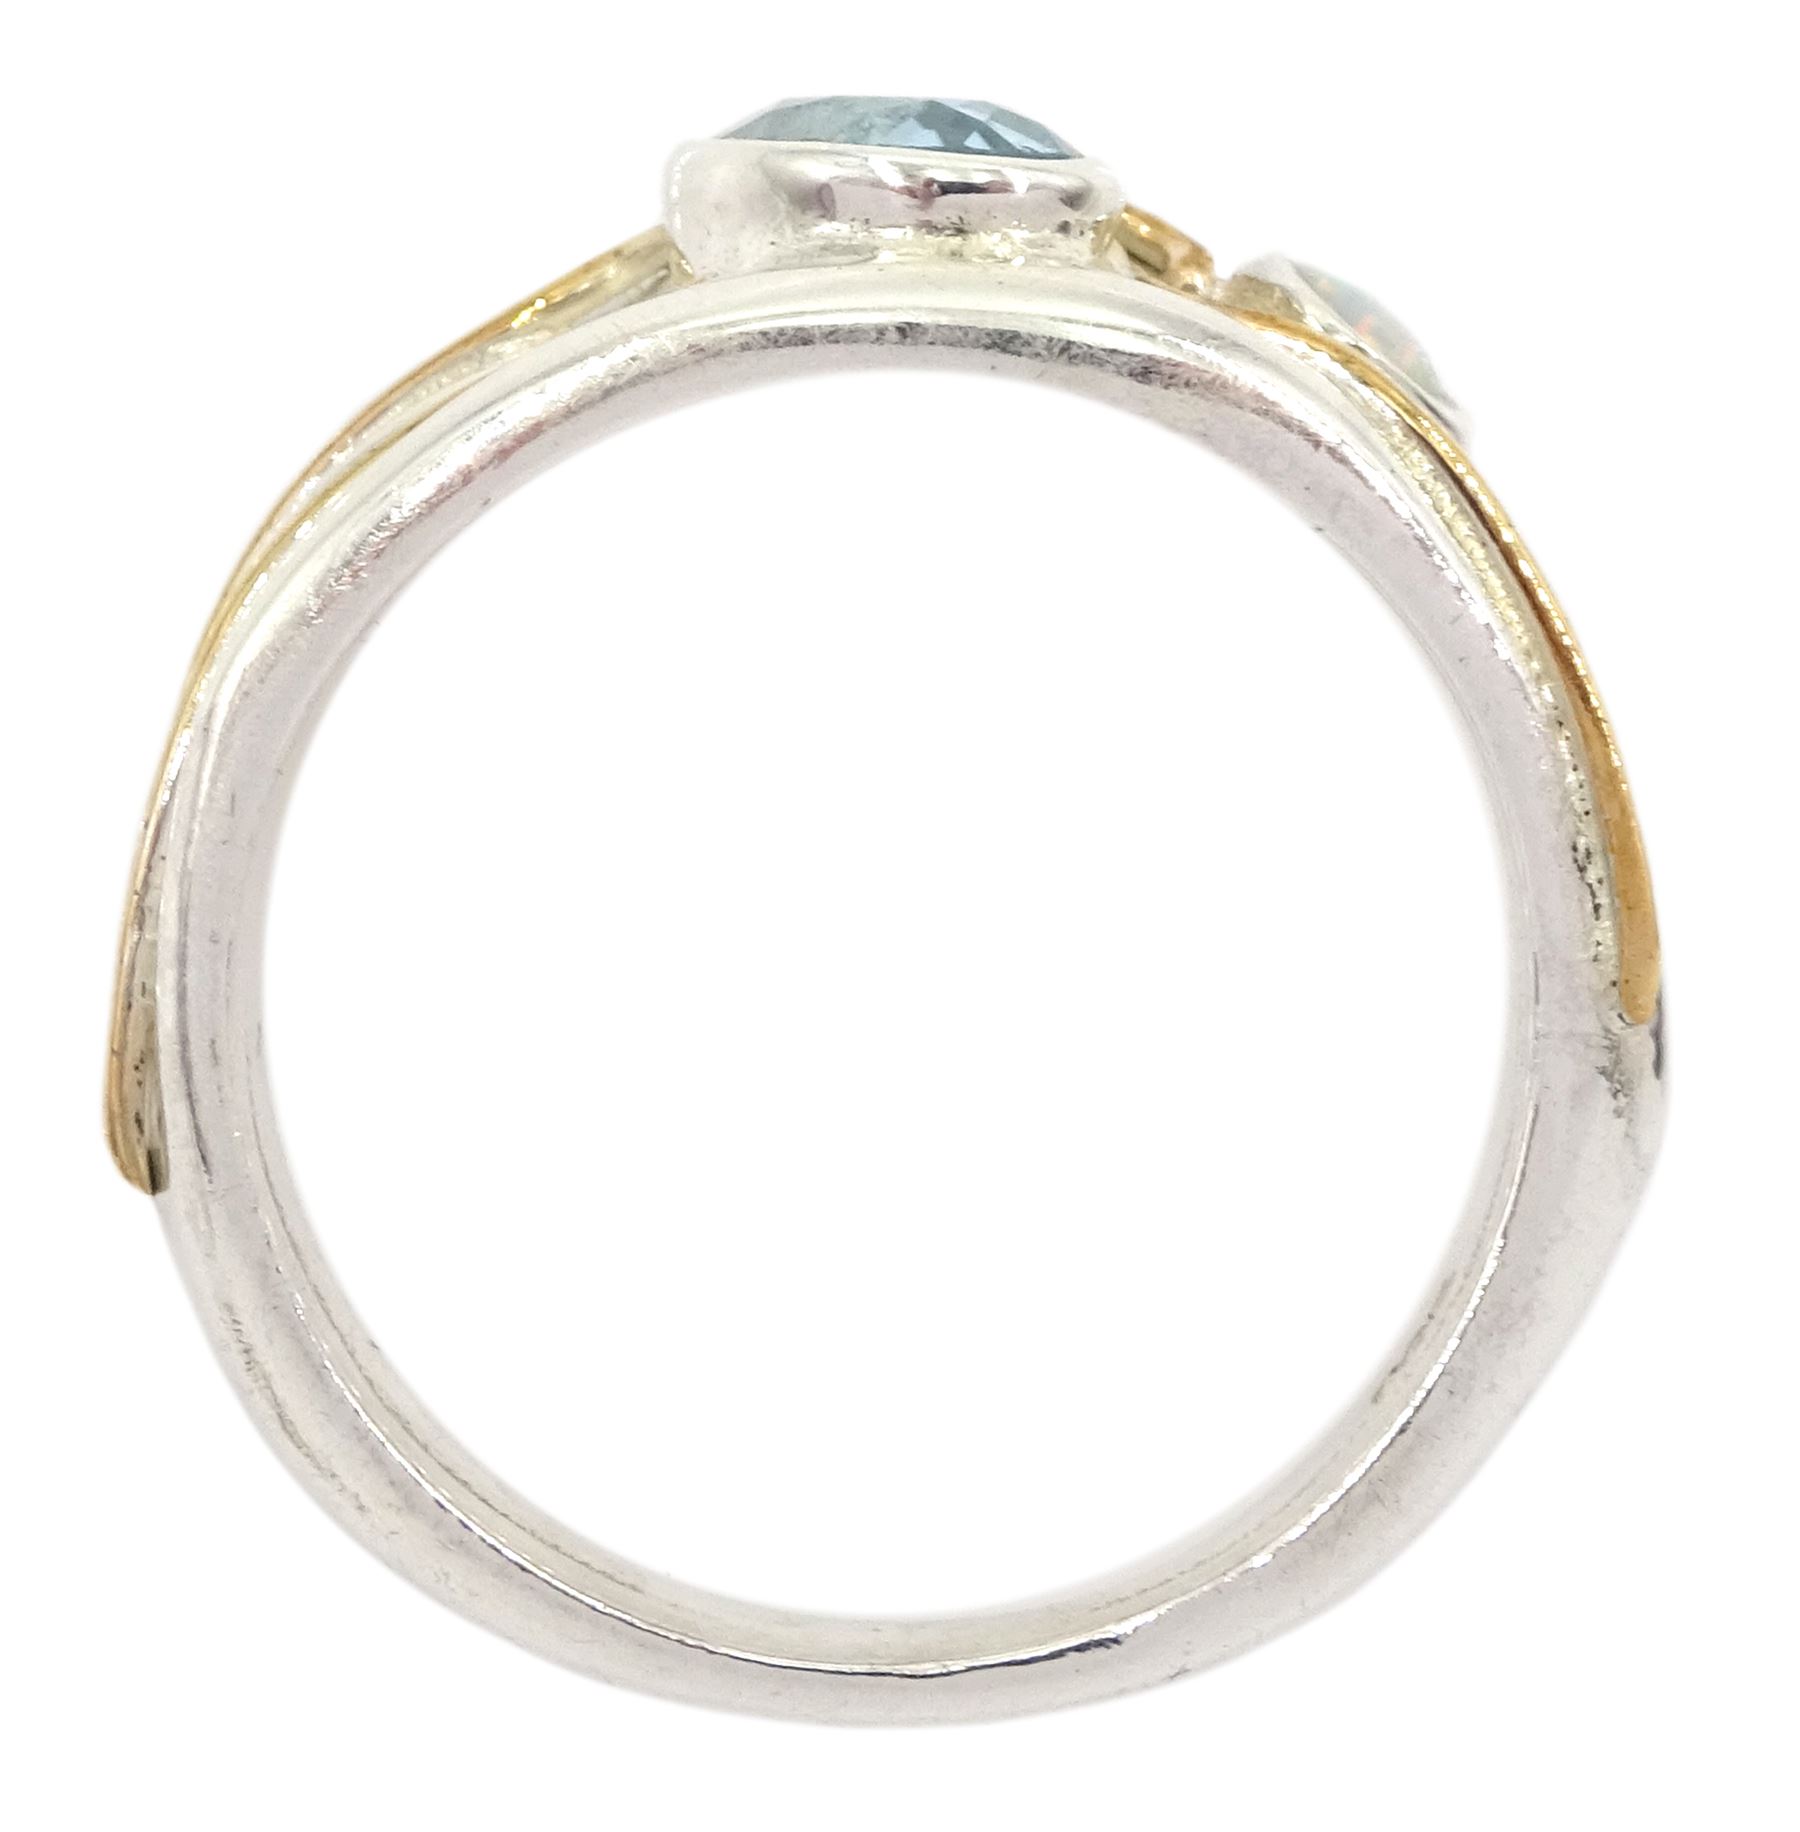 Silver and 14ct gold wire blue topaz and opal ring - Image 4 of 4